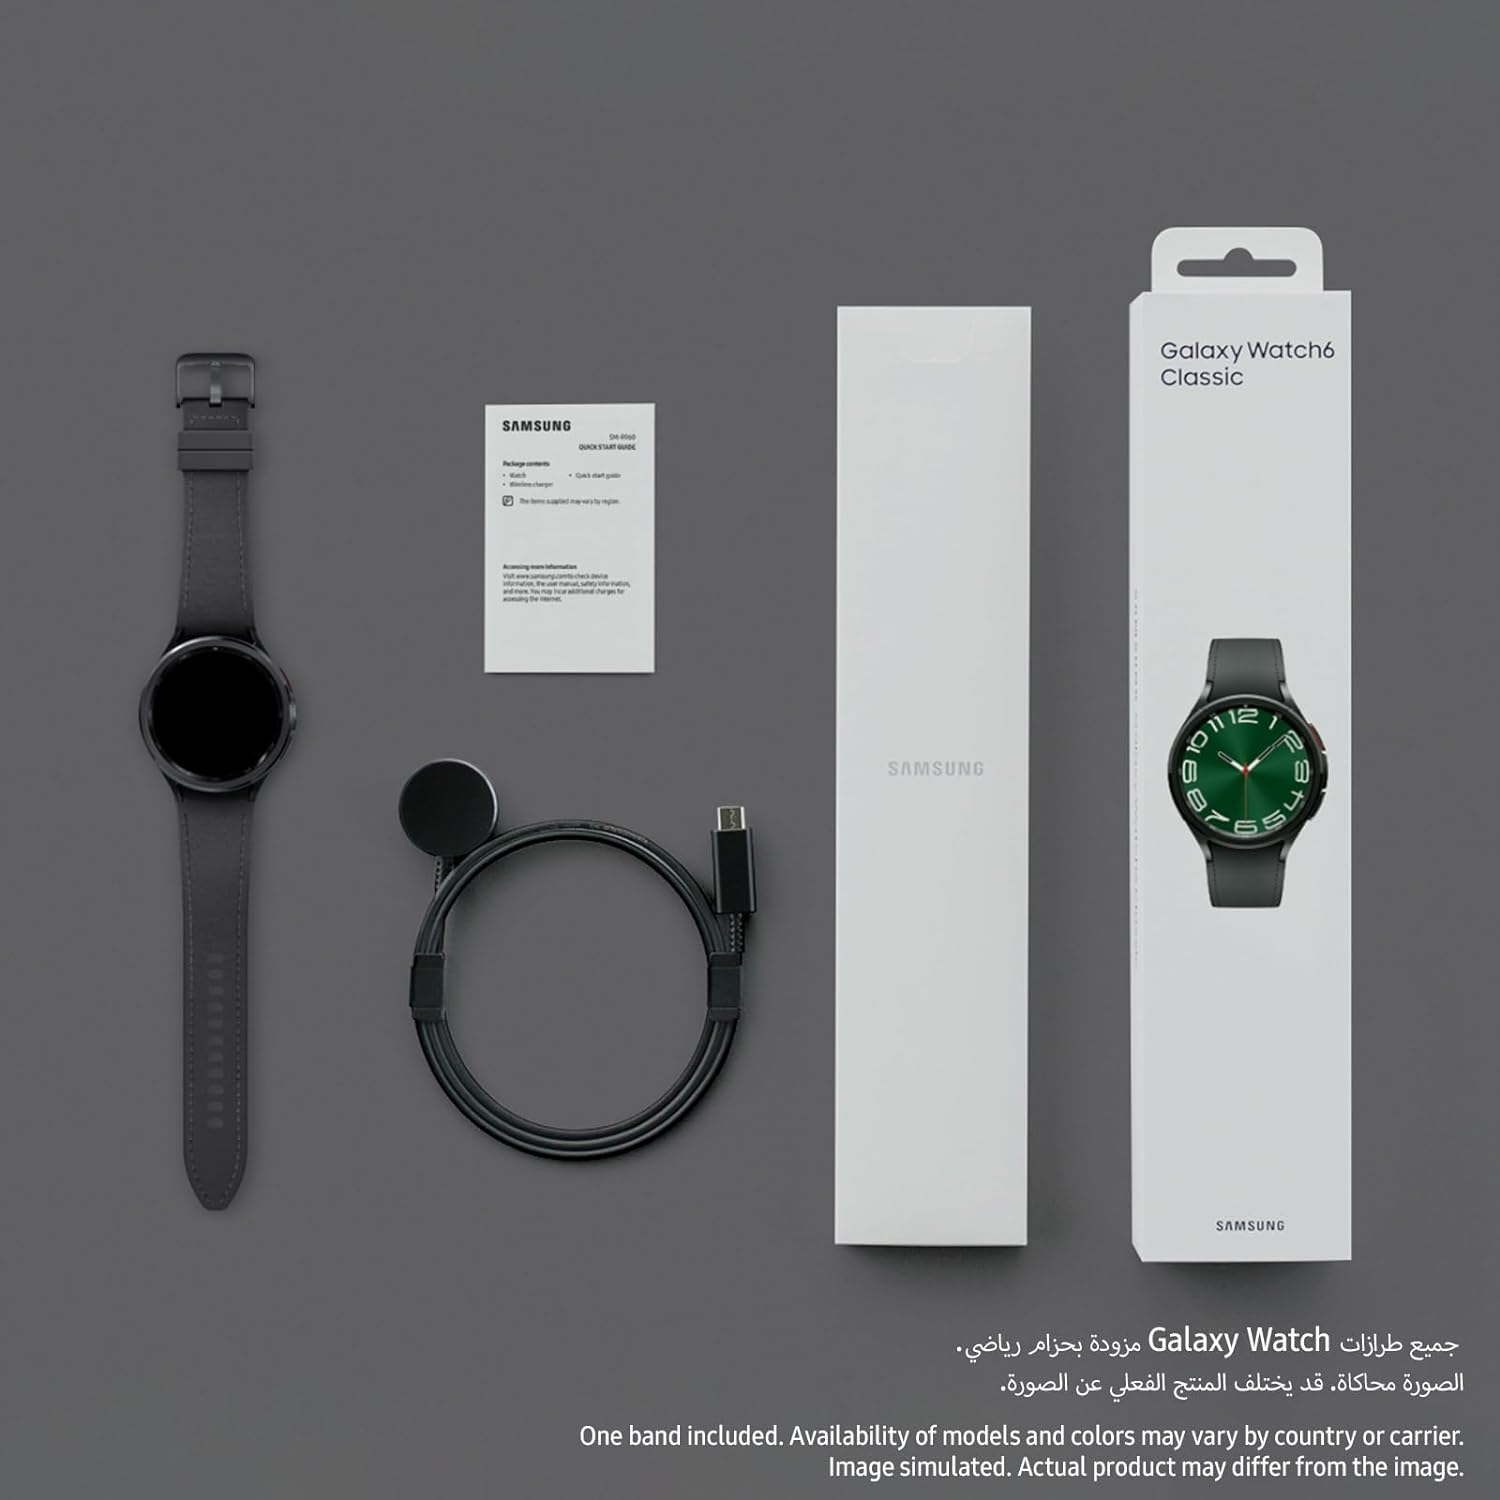 Samsung Galaxy Watch6 Classic Smartwatch - Customizable Watch Faces and Designs 8806095122533